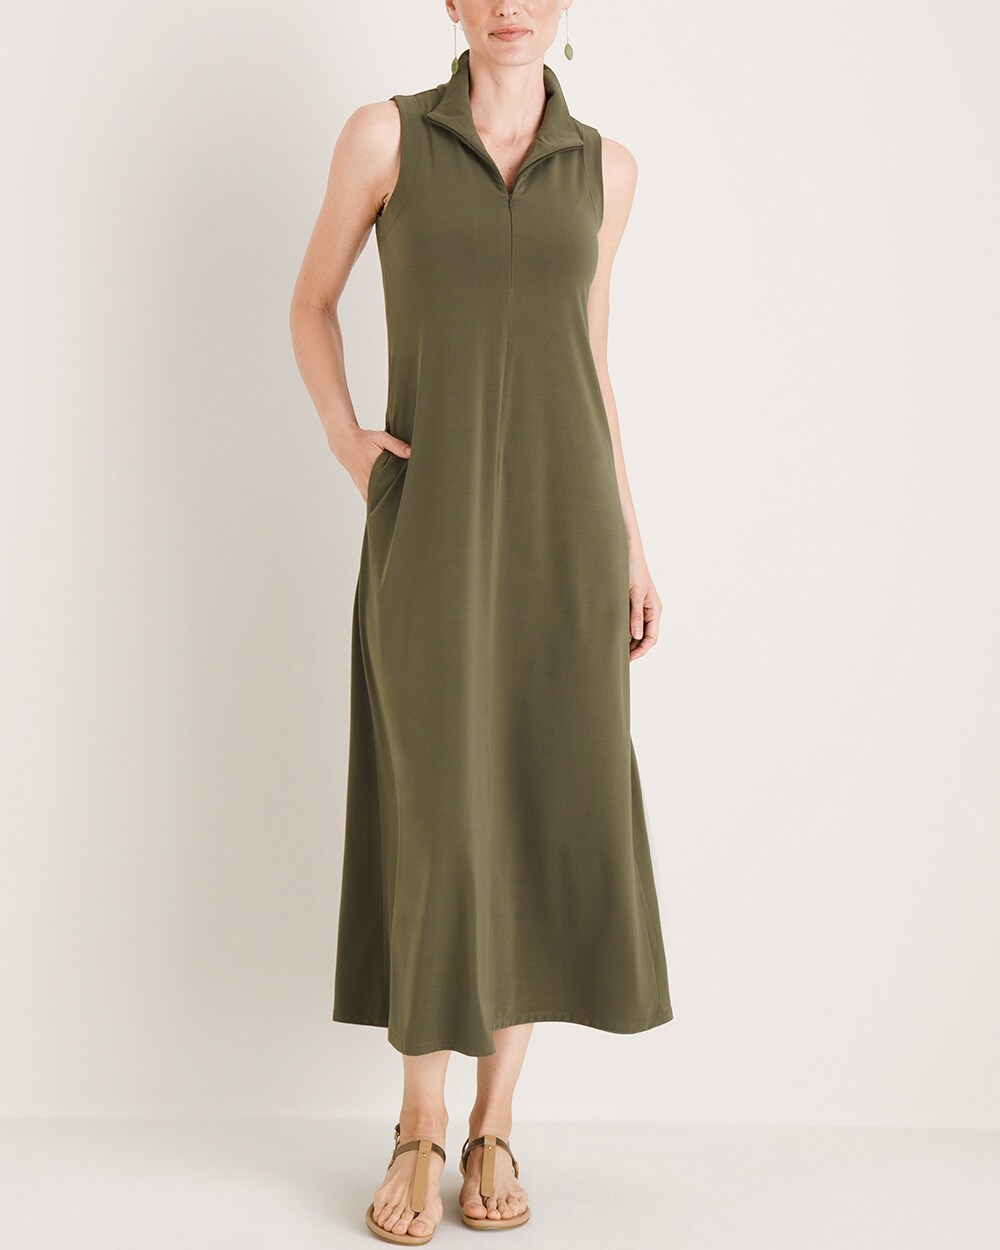 Easy Chic Zip-Neck A-Line Dress